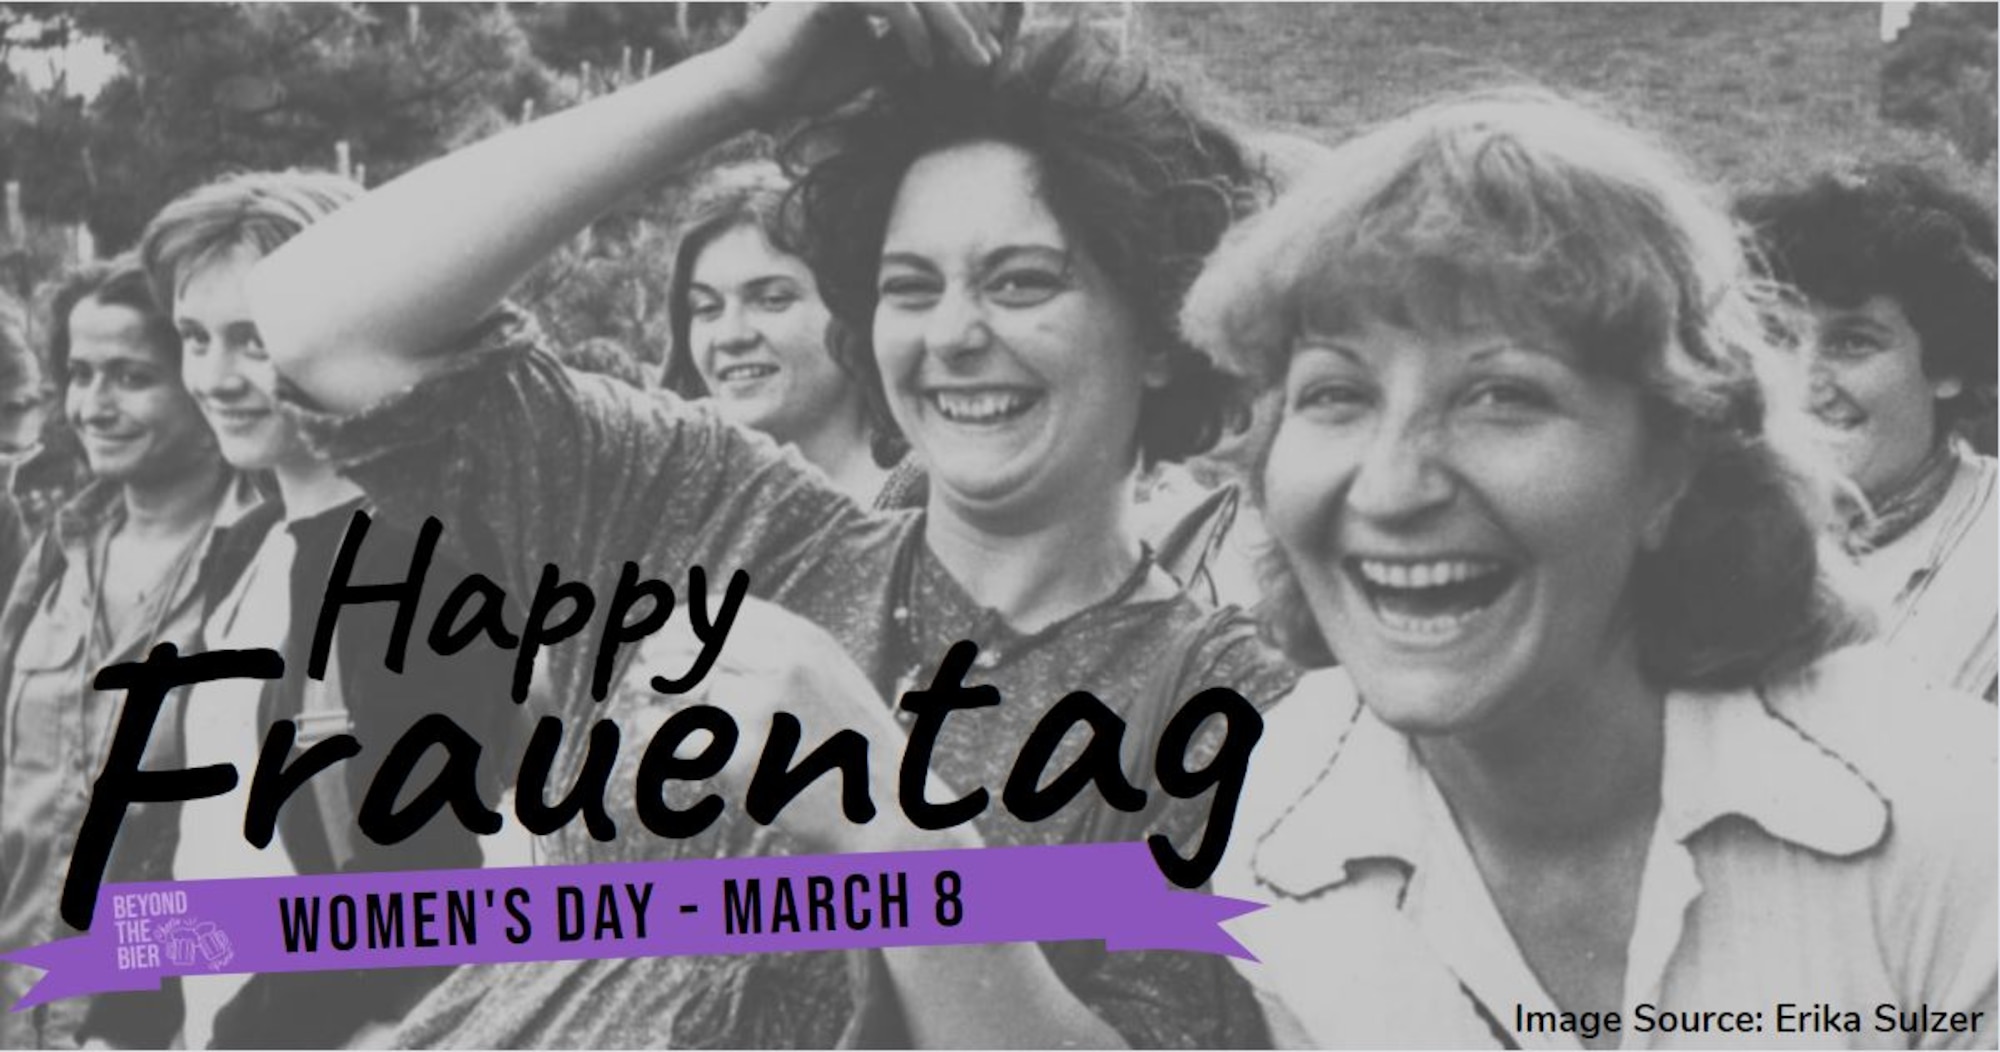 “Frauentag” translates to “Frauen” meaning women and “tag” meaning day. It is an observance celebrated in varying households across German states on March 8th every year.